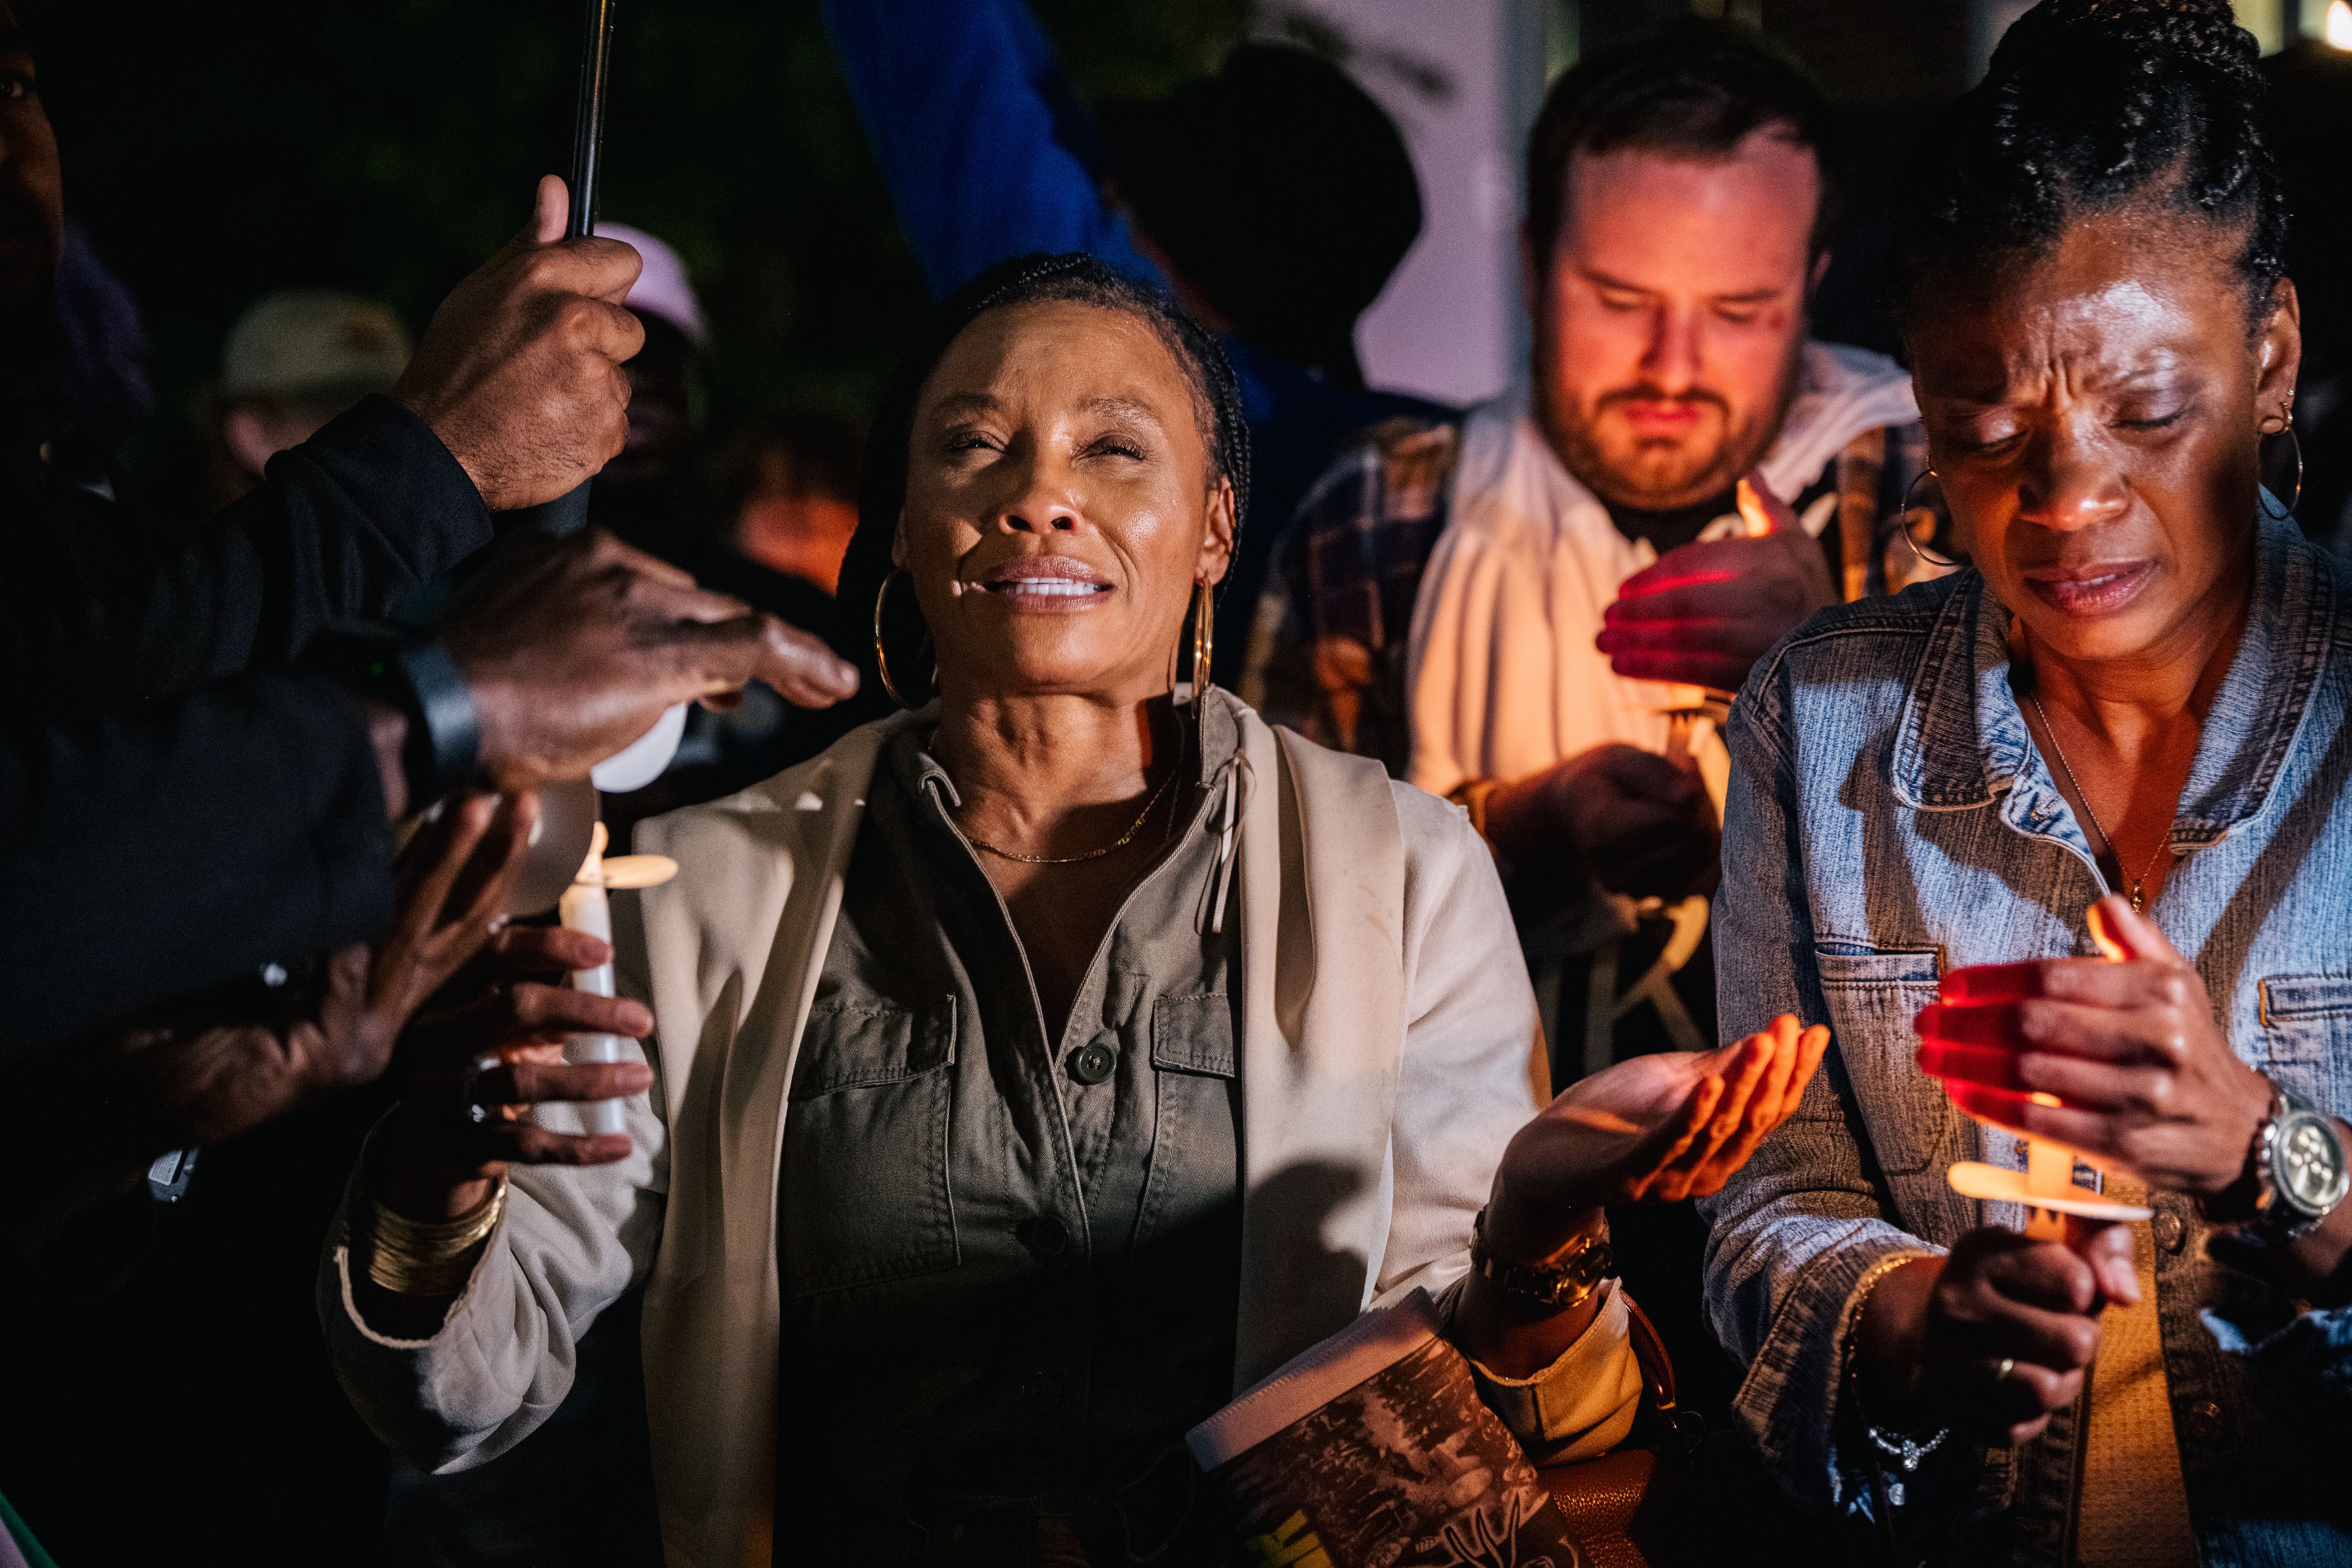  A woman cries out while attending a candlelight vigil in the Greenwood district during commemorations of the 100th anniversary of the Tulsa Race Massacre on May 31